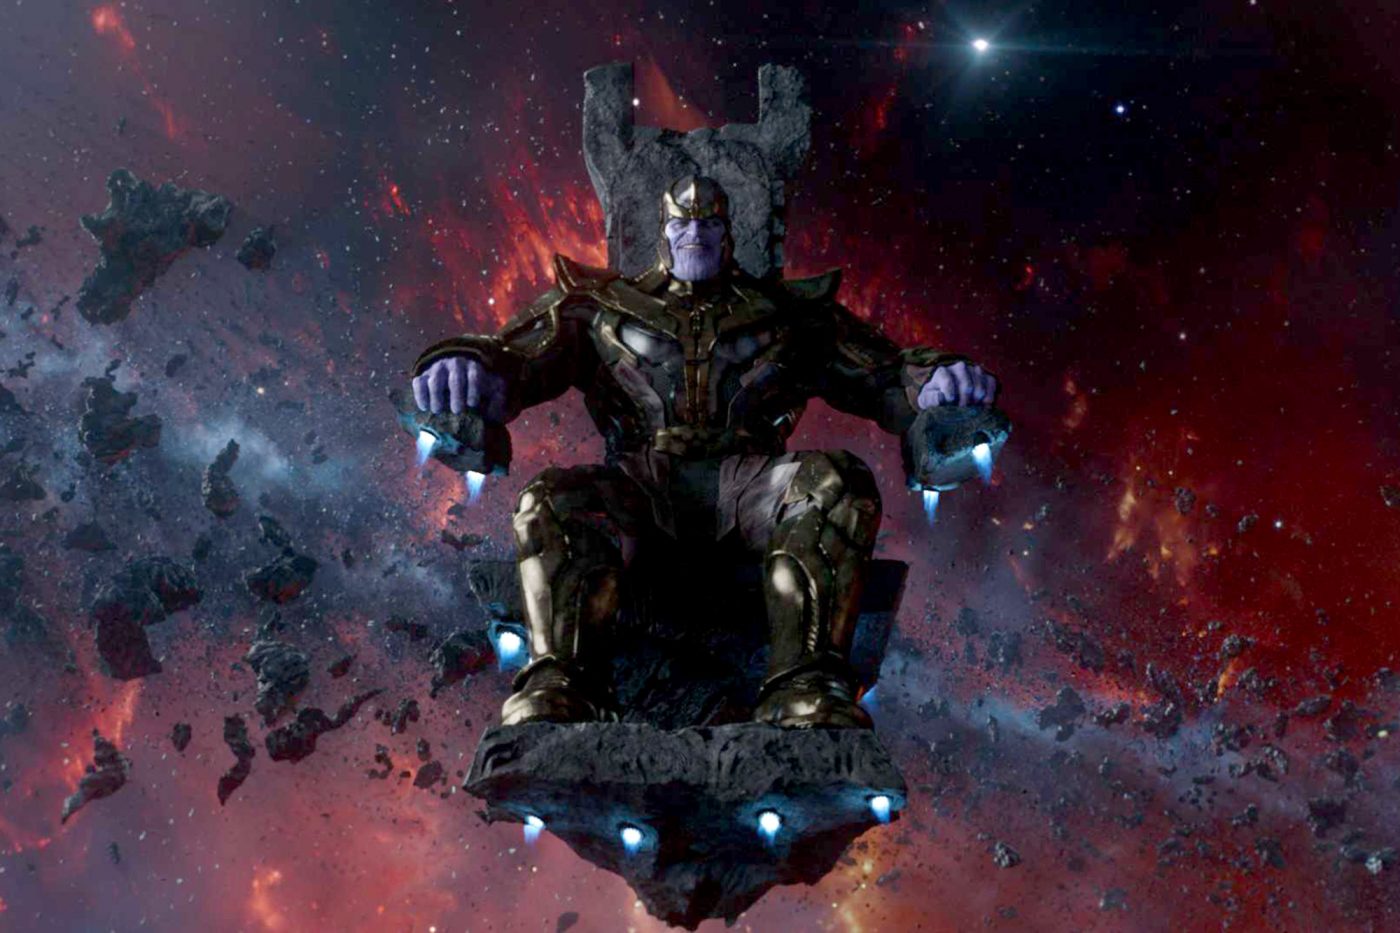 Leaked 'Avengers: Infinity War' toy image shows fully-armored Thanos in [Spoiler]